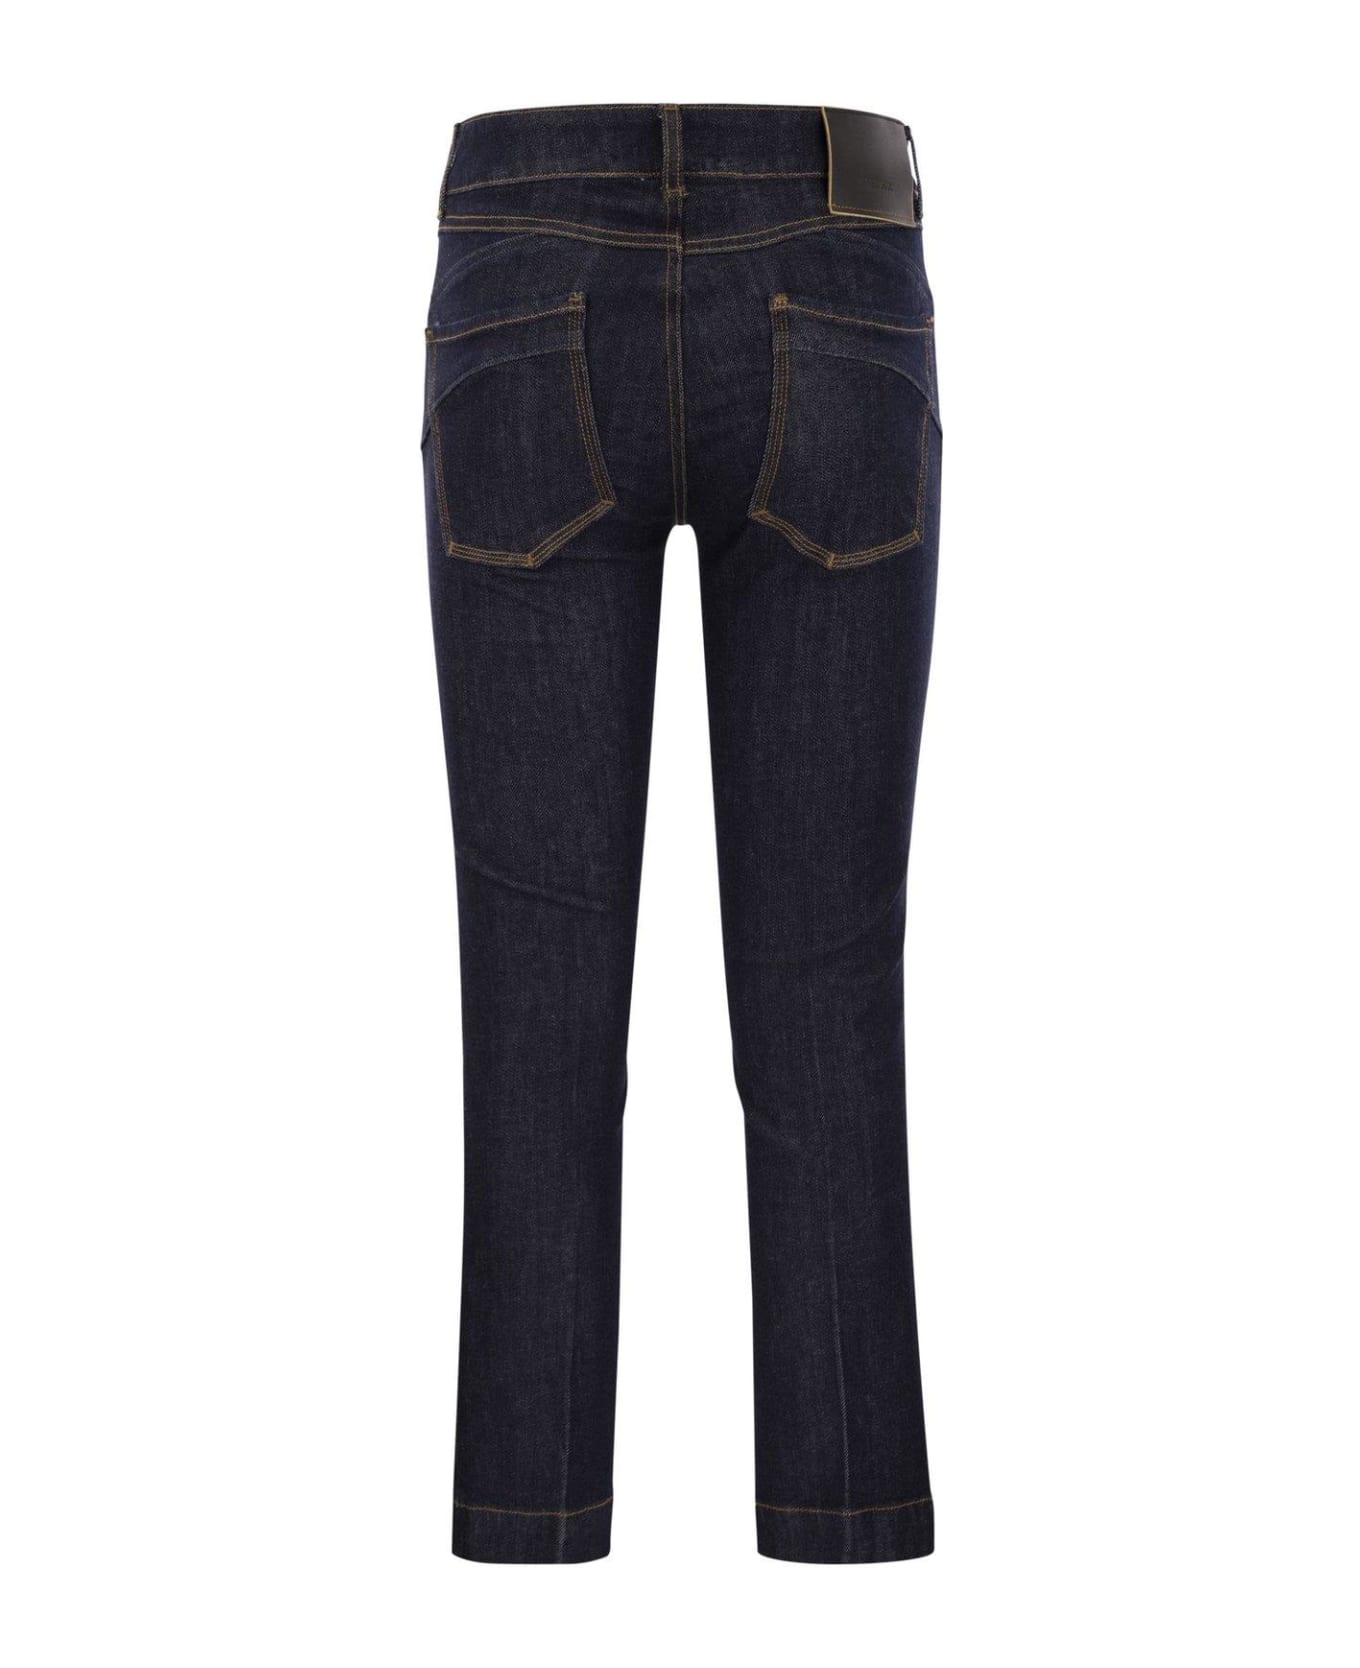 SportMax Flared Perfect-fit Jeans - NAVY